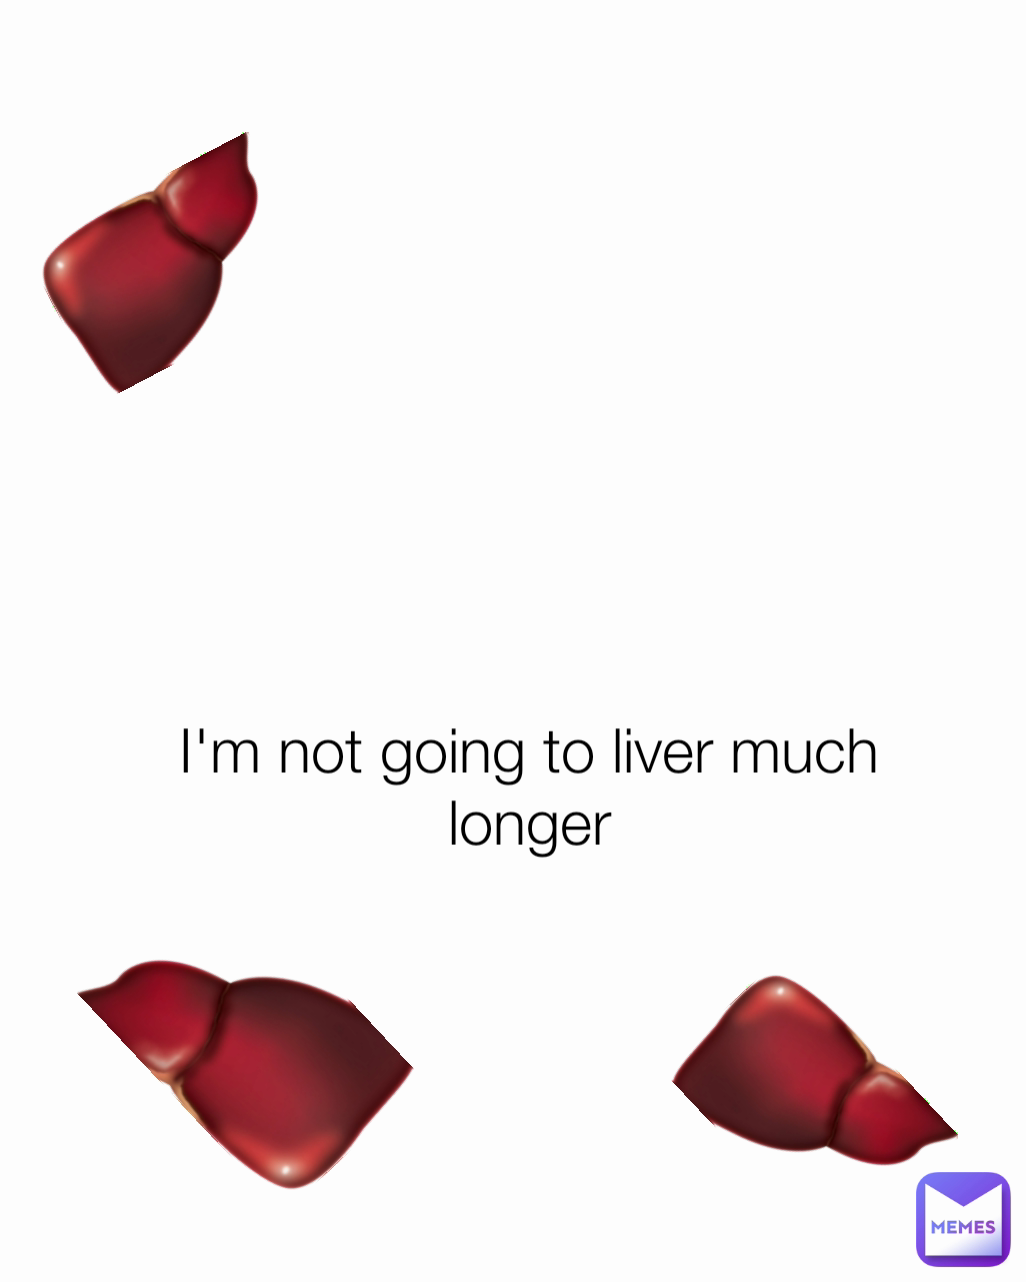 I'm not going to liver much longer